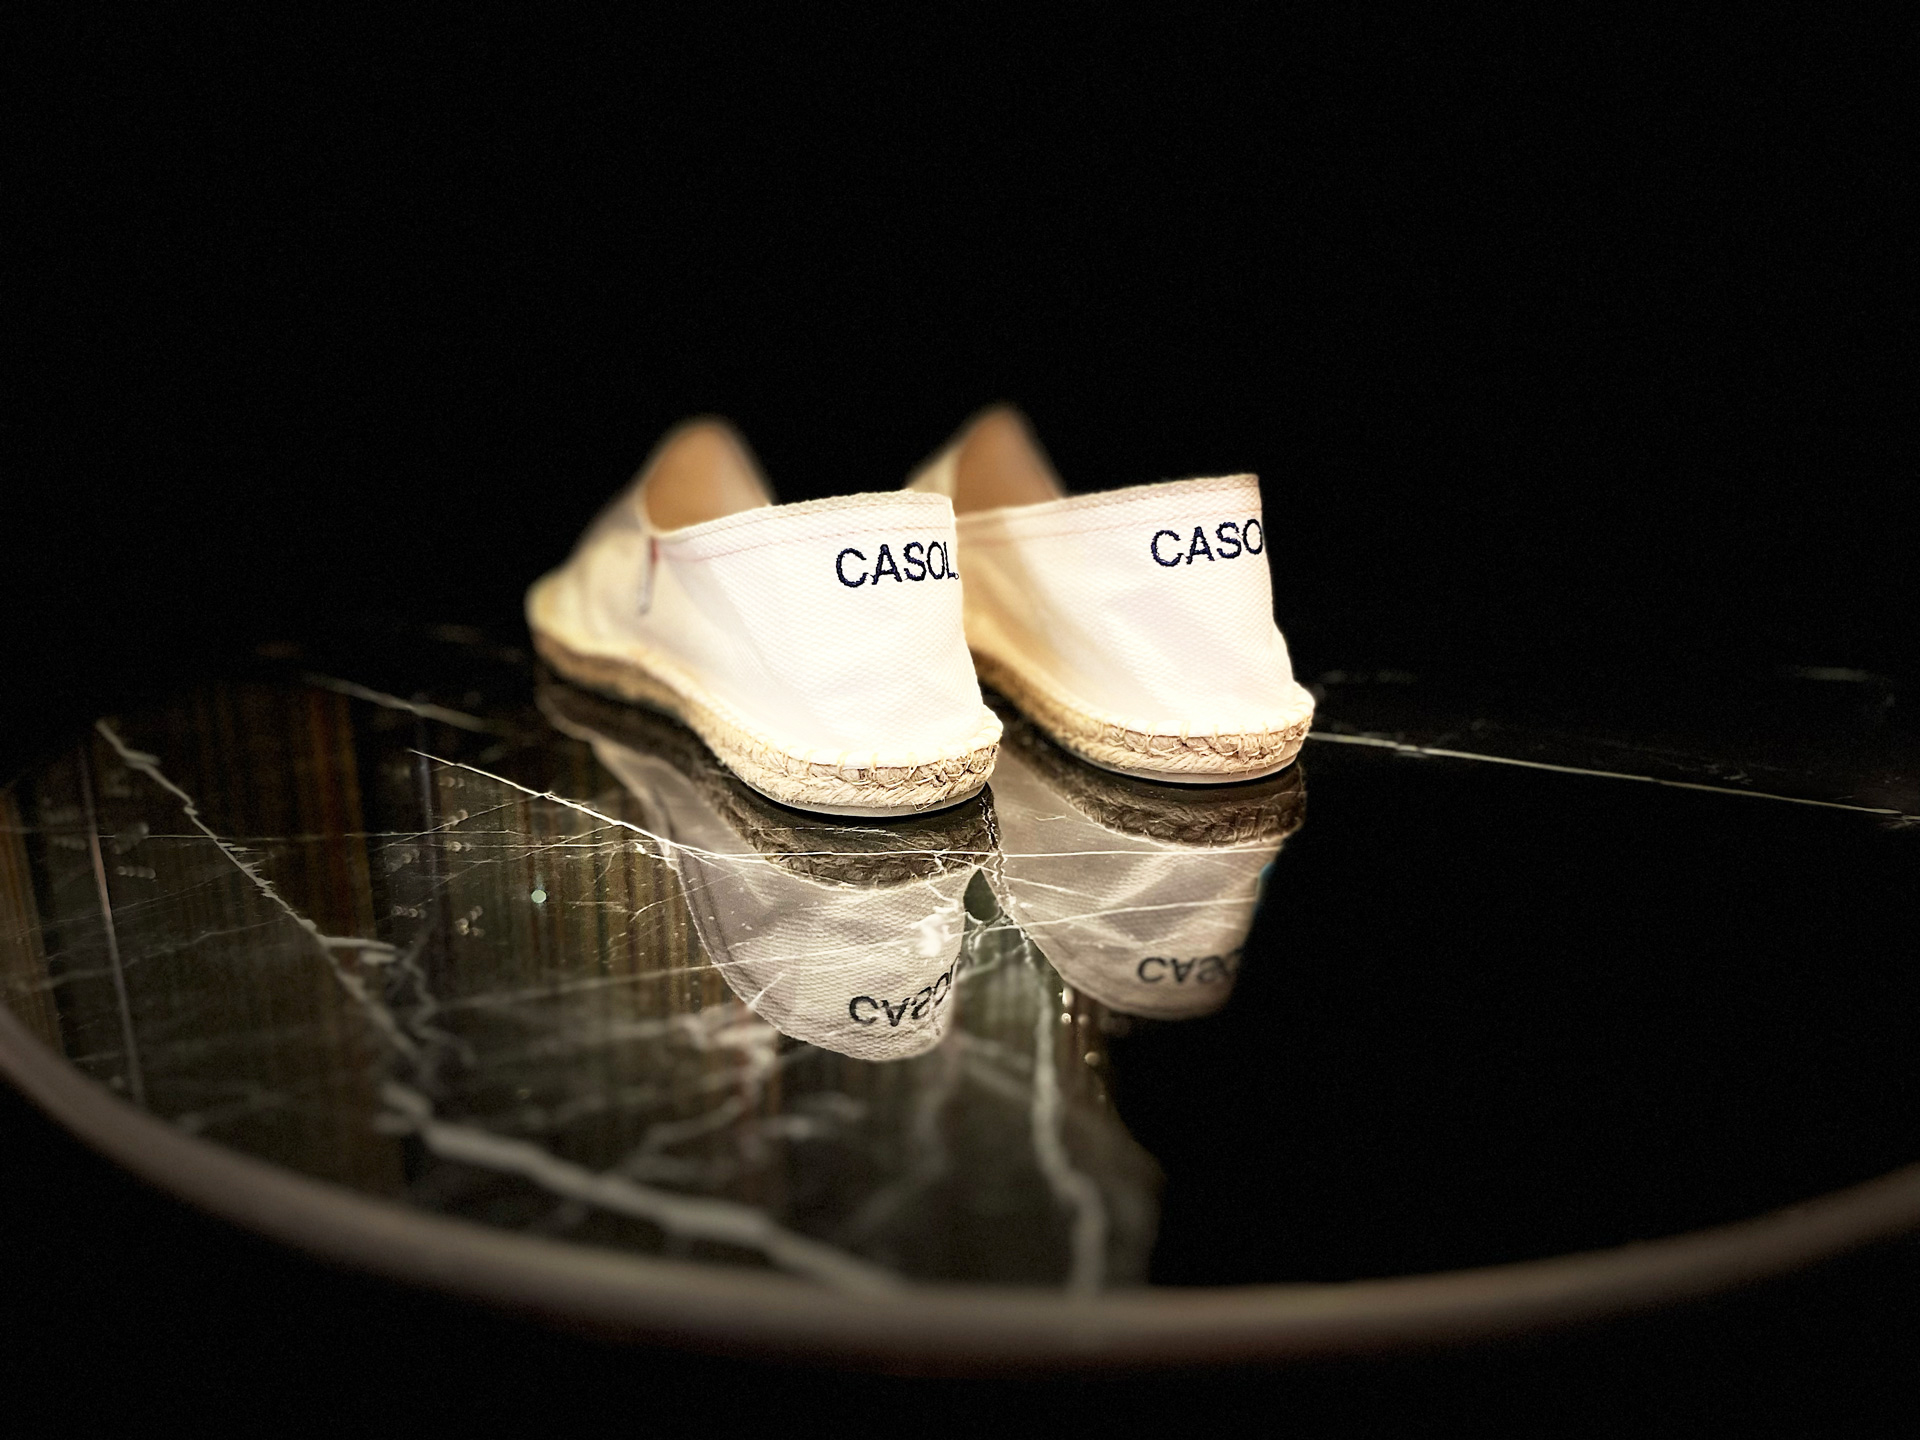 Casol x Payote Espadrilles - White and Navy Blue